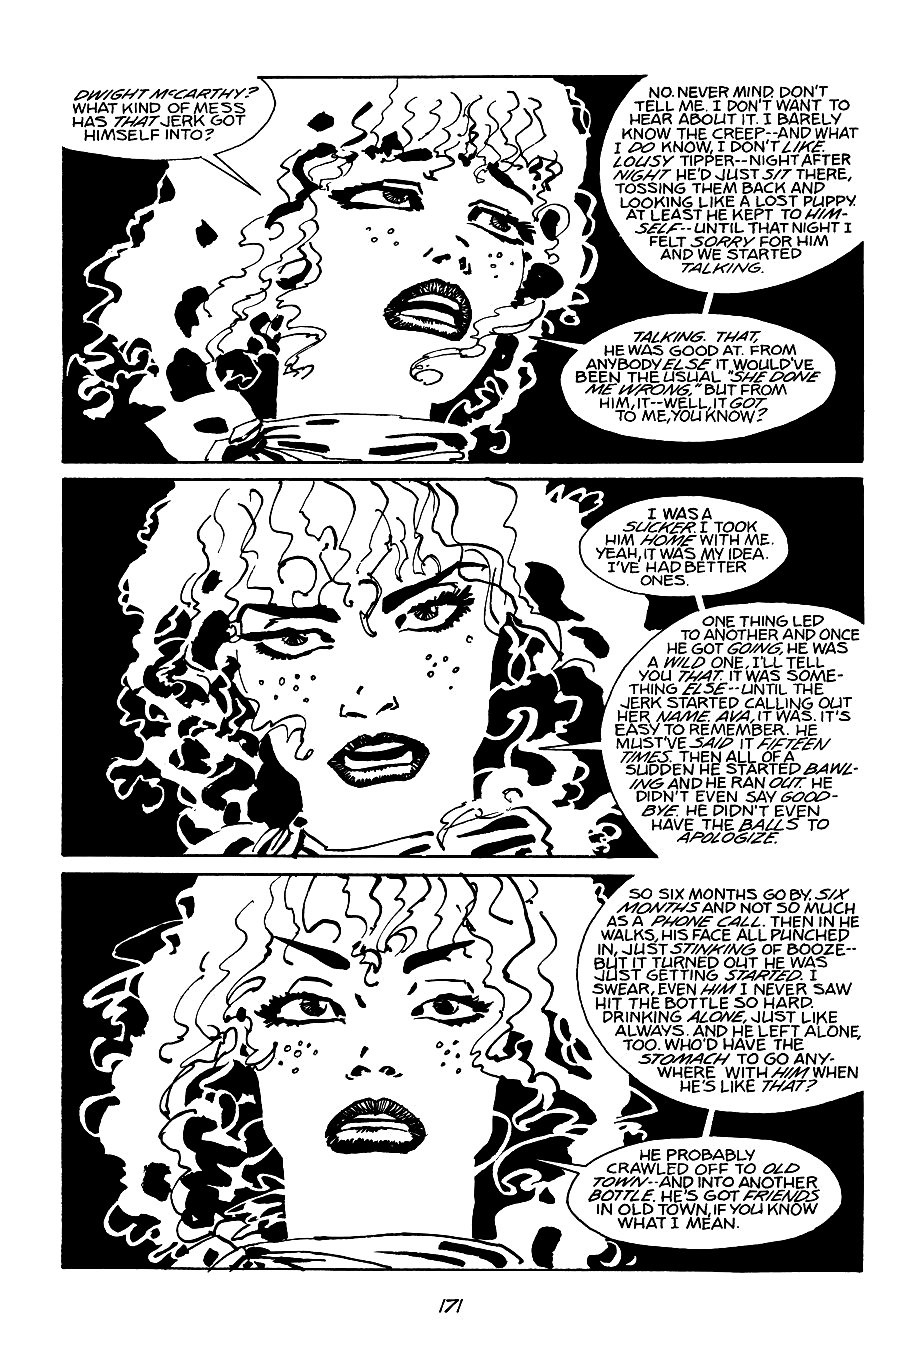 page 171 of sin city 2 the hard goodbye